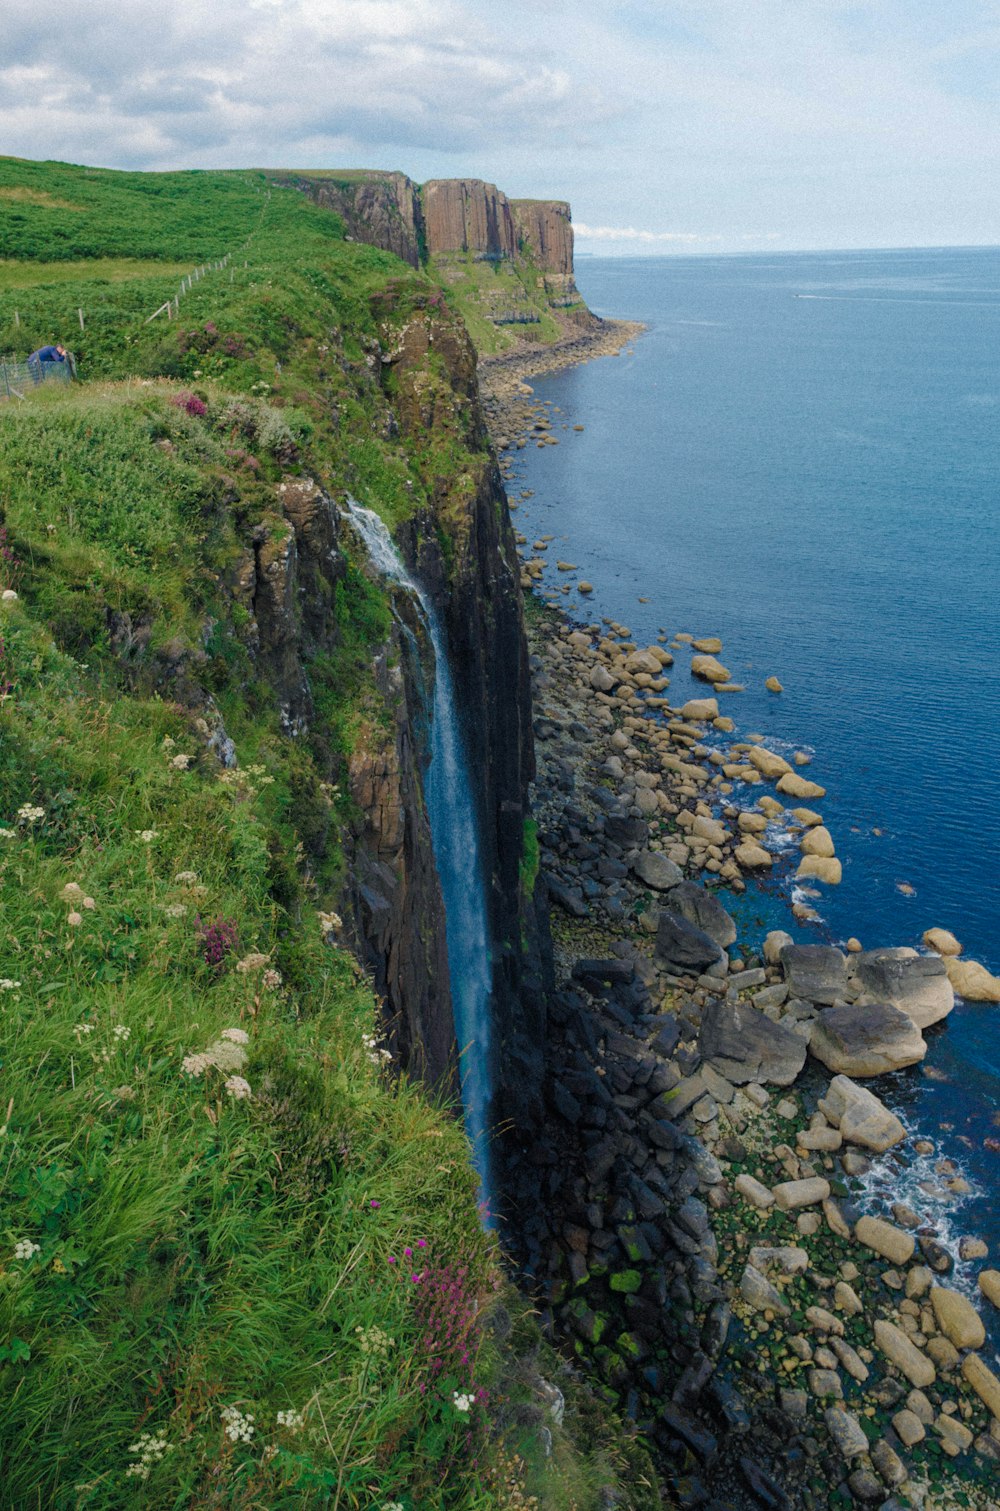 a rocky cliff side with a body of water and a large cliff